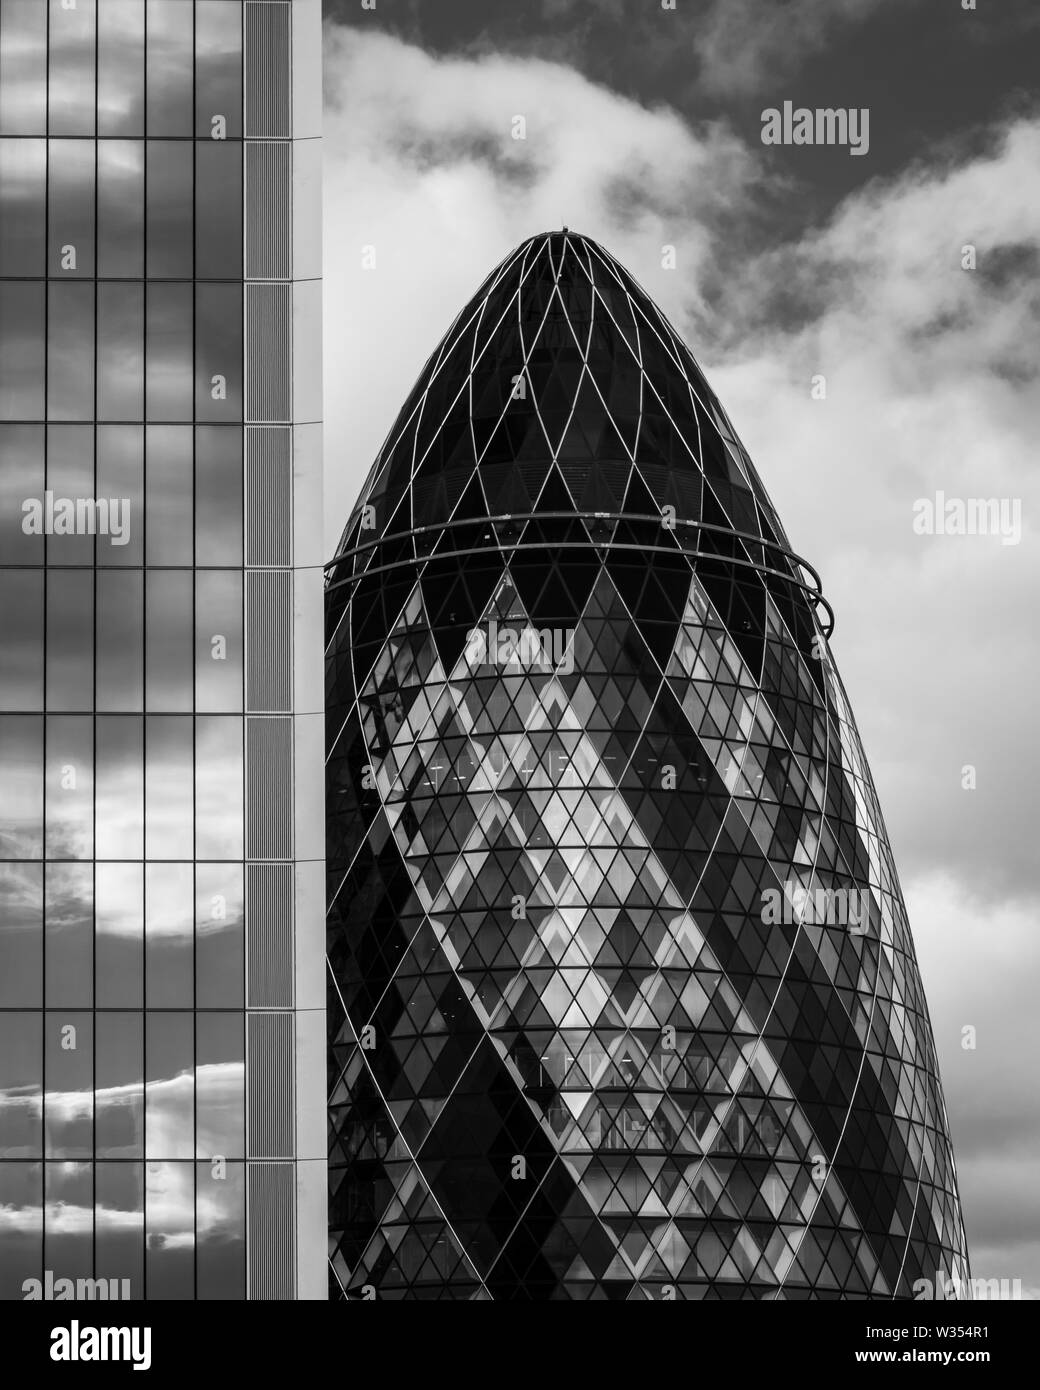 A black and white image of the top of the Gherkin building in London Stock Photo